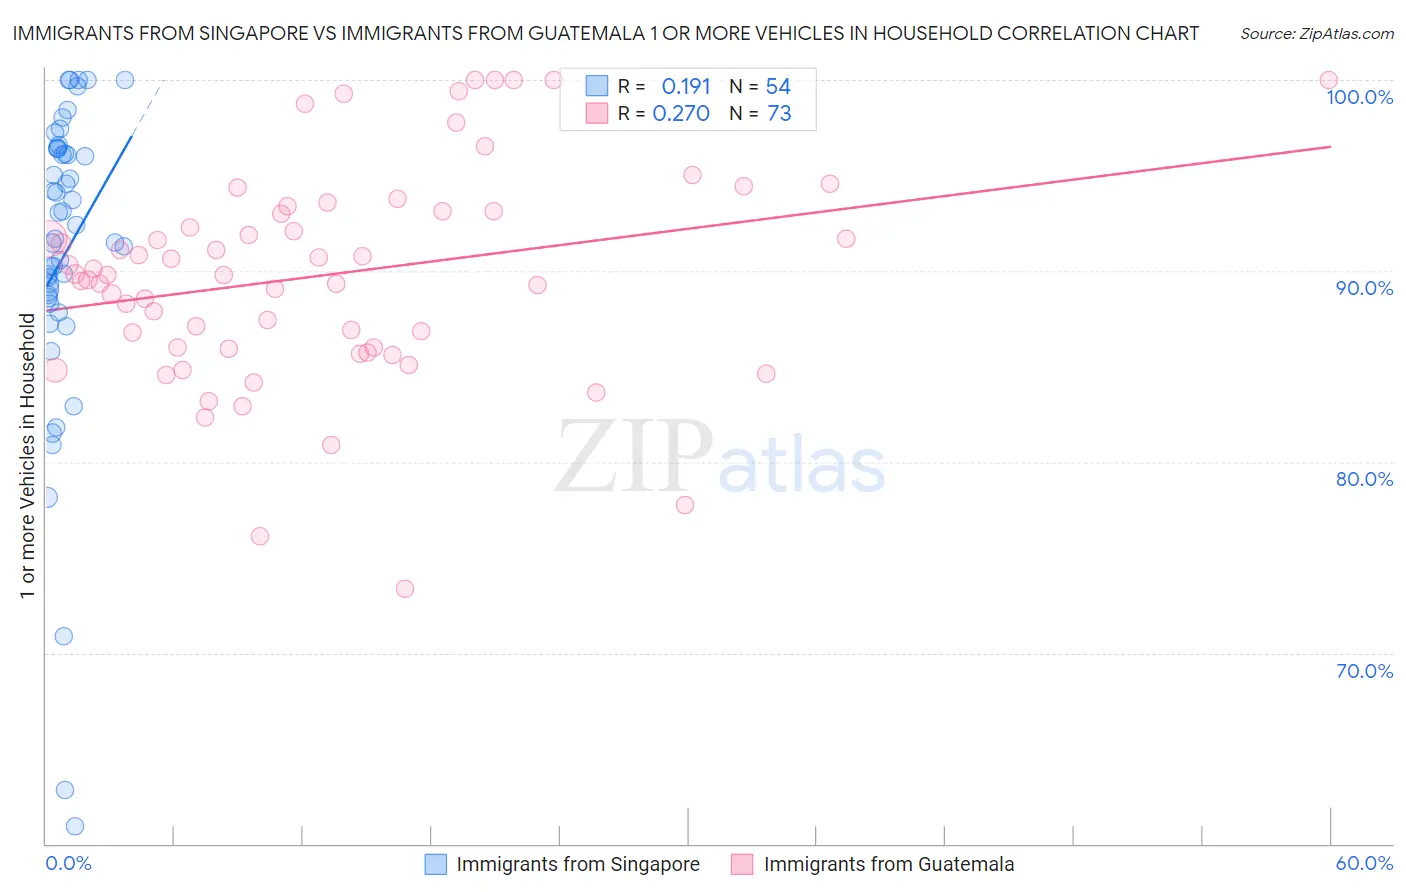 Immigrants from Singapore vs Immigrants from Guatemala 1 or more Vehicles in Household